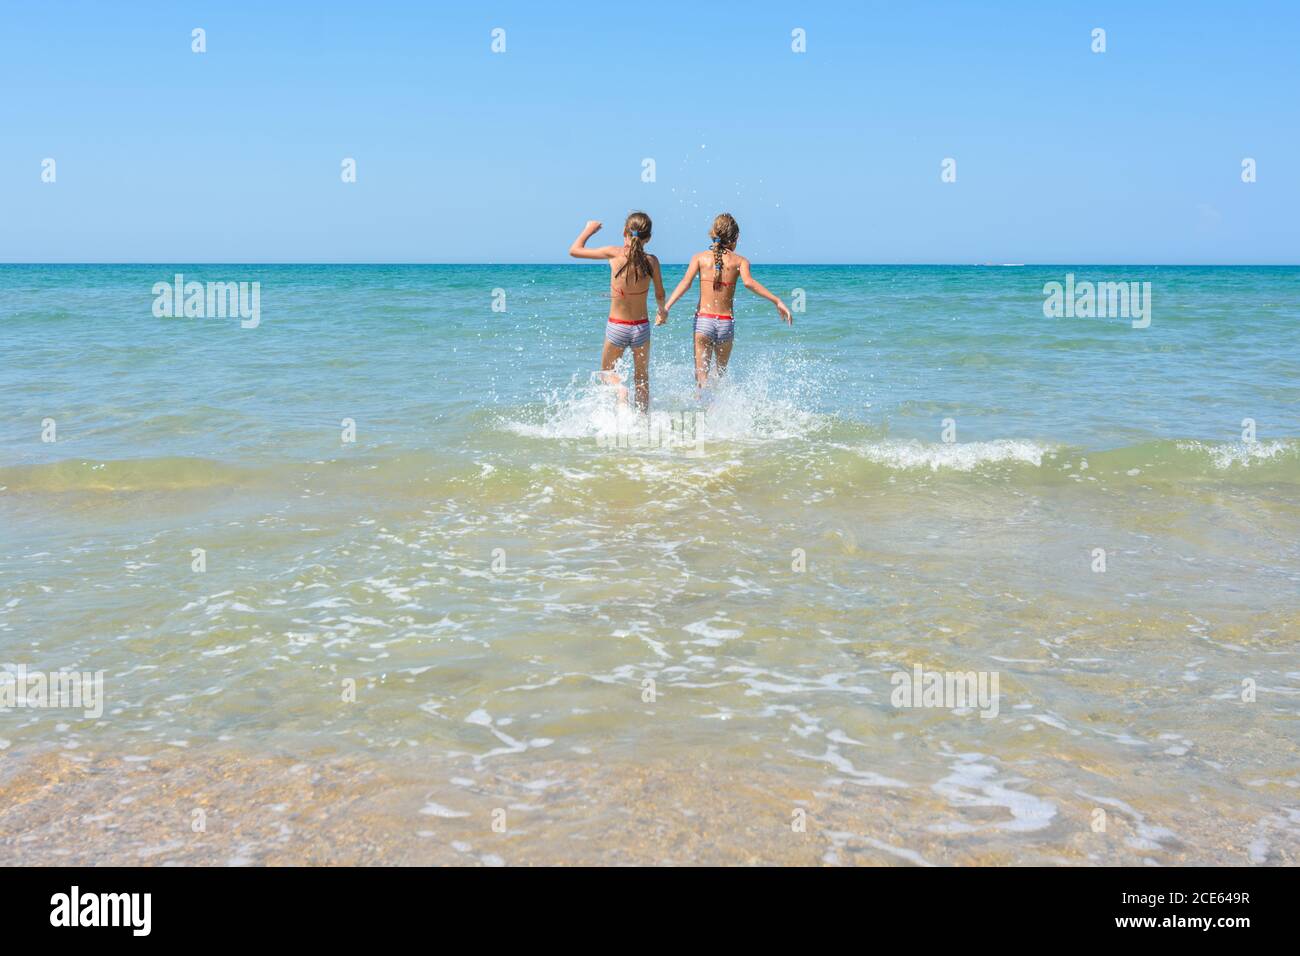 Girls run in the water swimming in shallow water Stock Photo